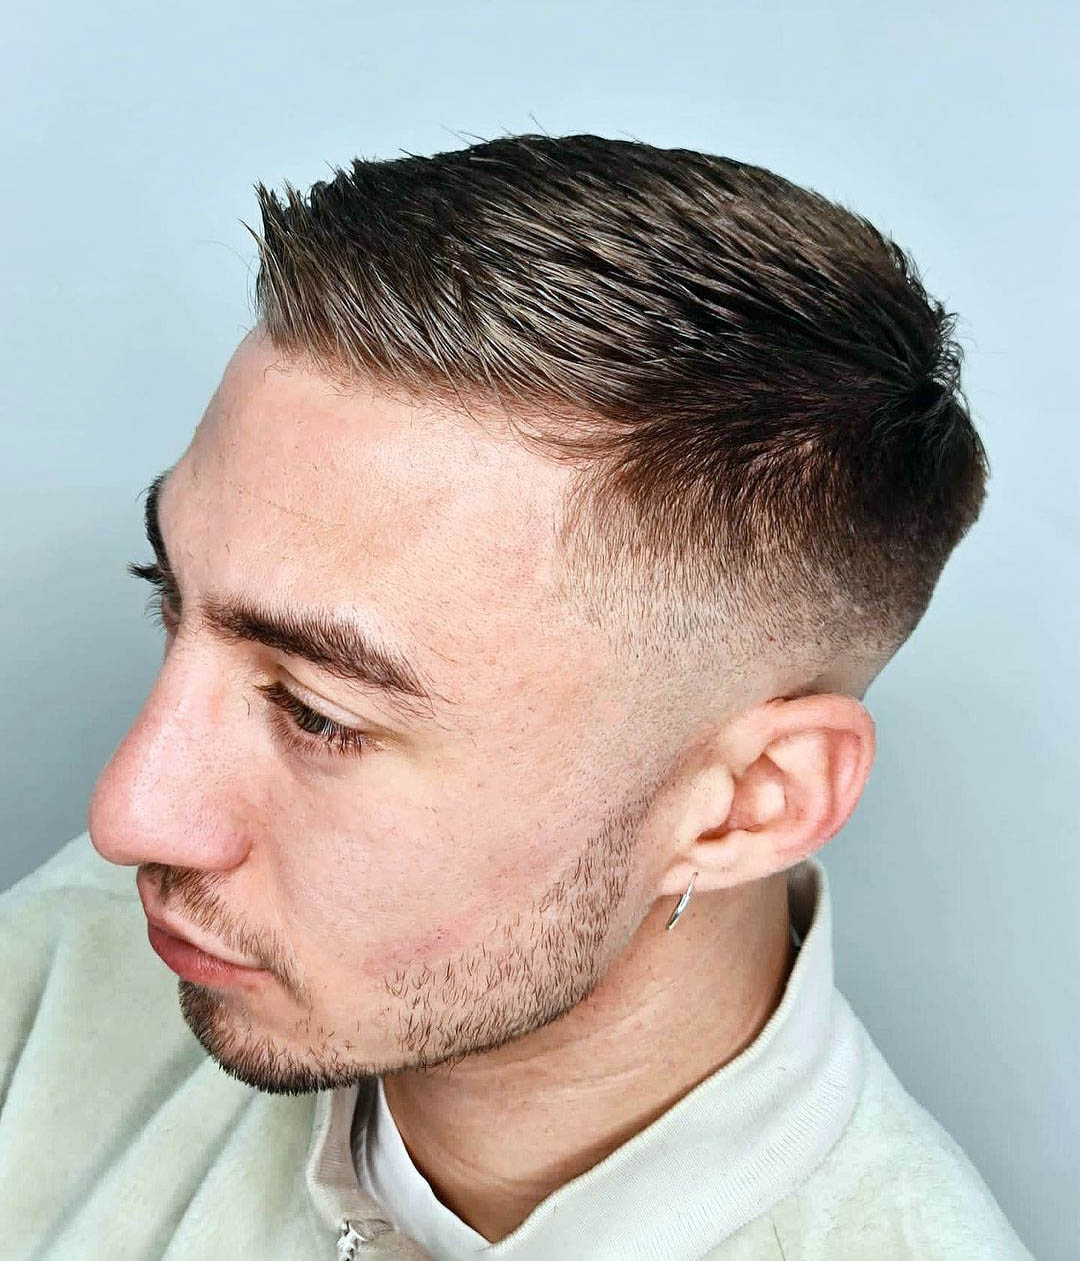 Spiked Up Fringe with Skin Fade